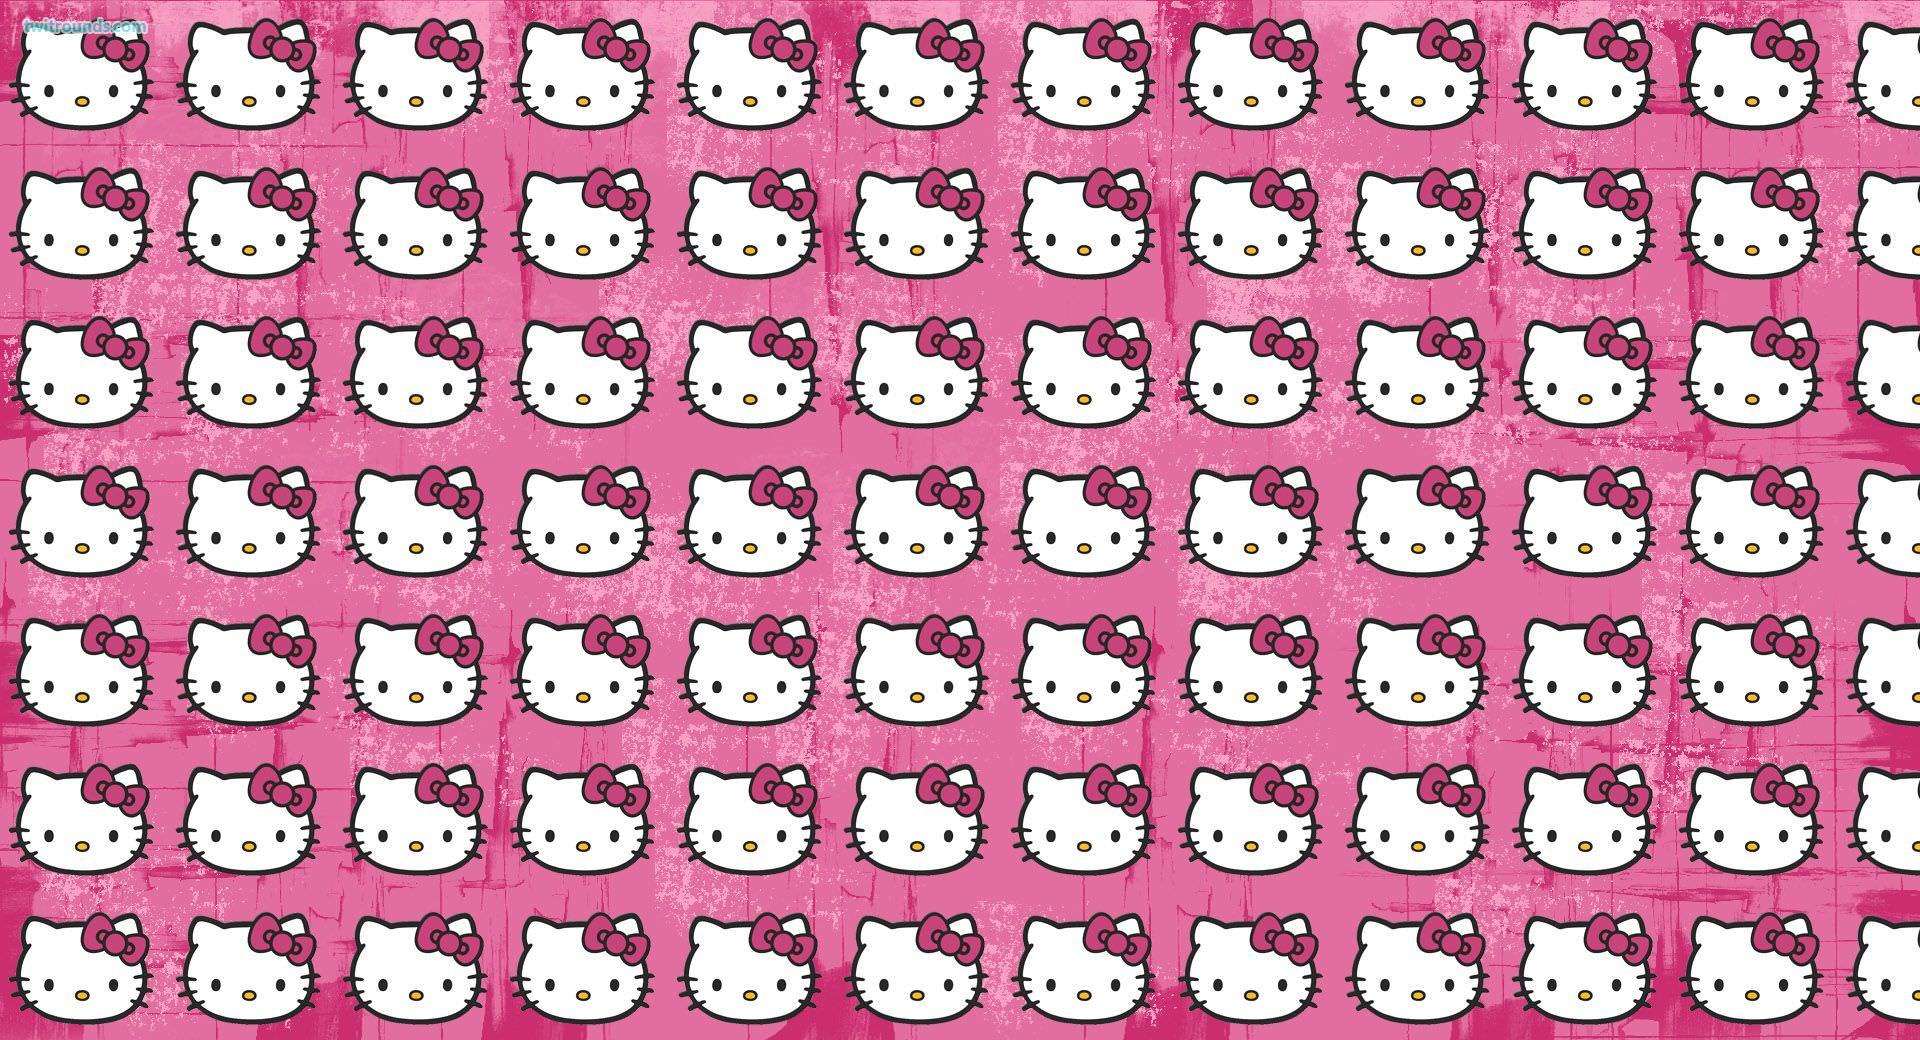 Hello Kitty Background, Wallpaper, Image. Design Trends